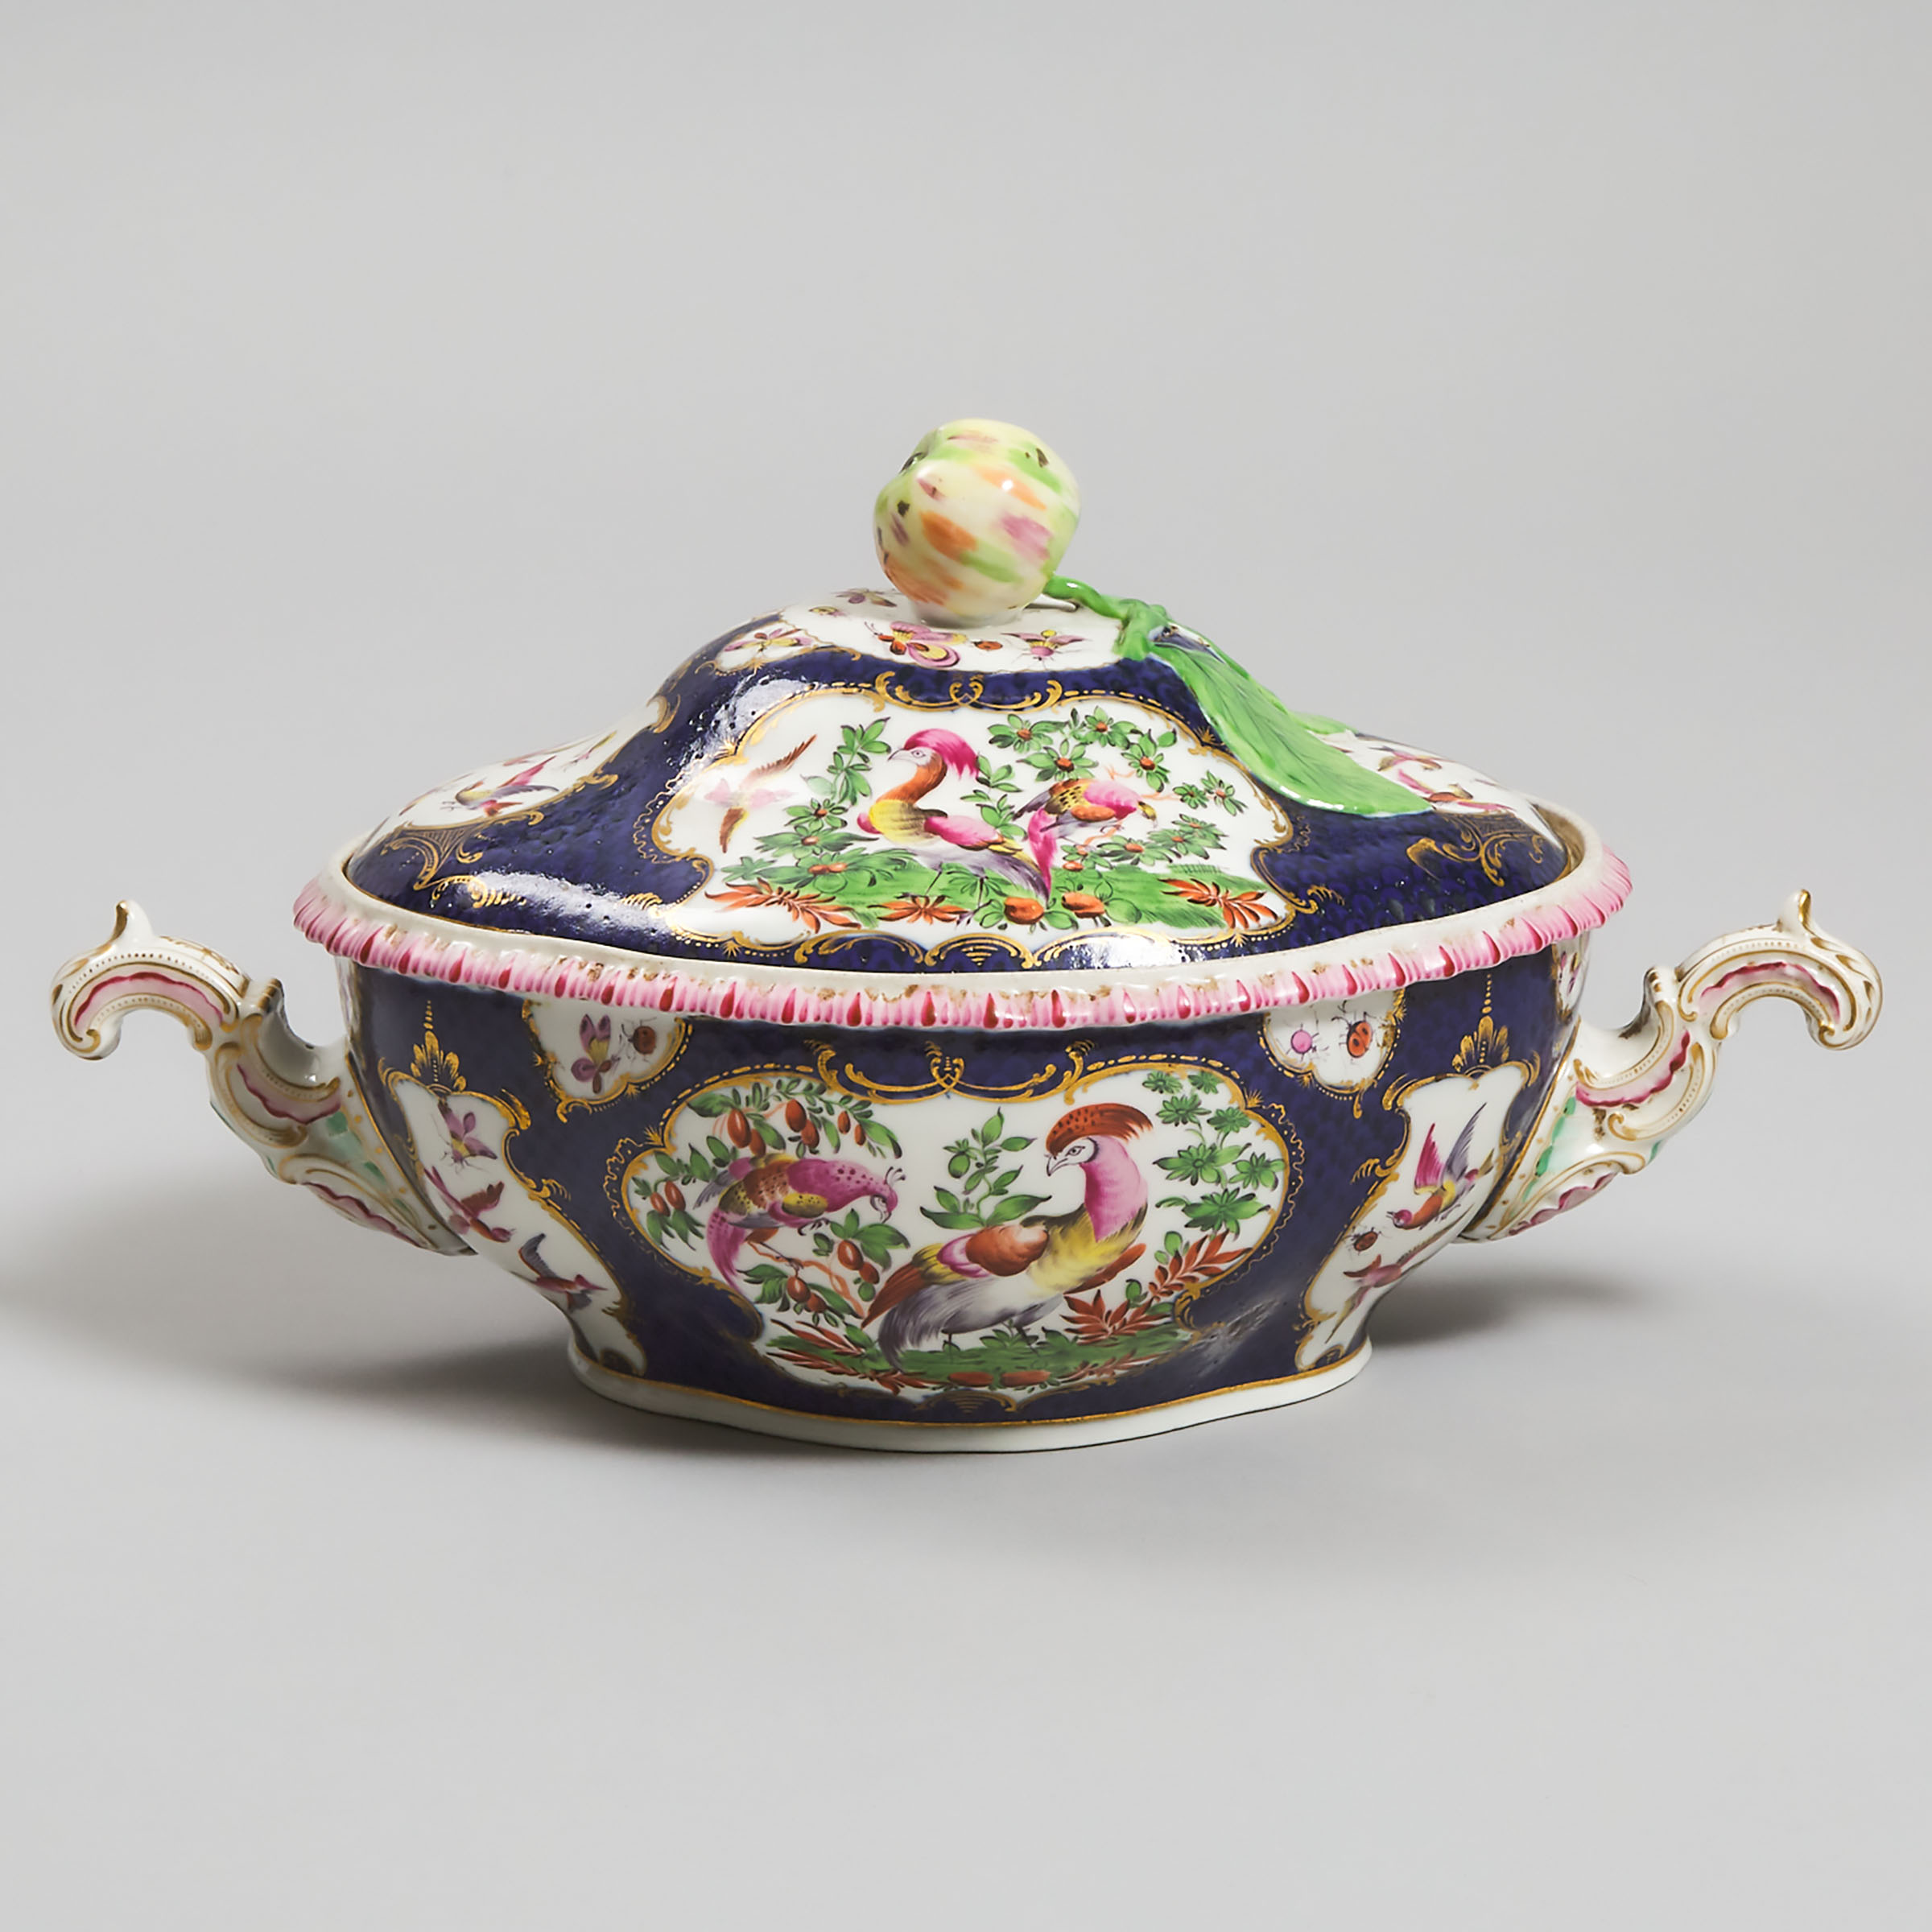 Samson 'Worcester' Scale Blue Ground Exotic Birds Covered Tureen, c.1900